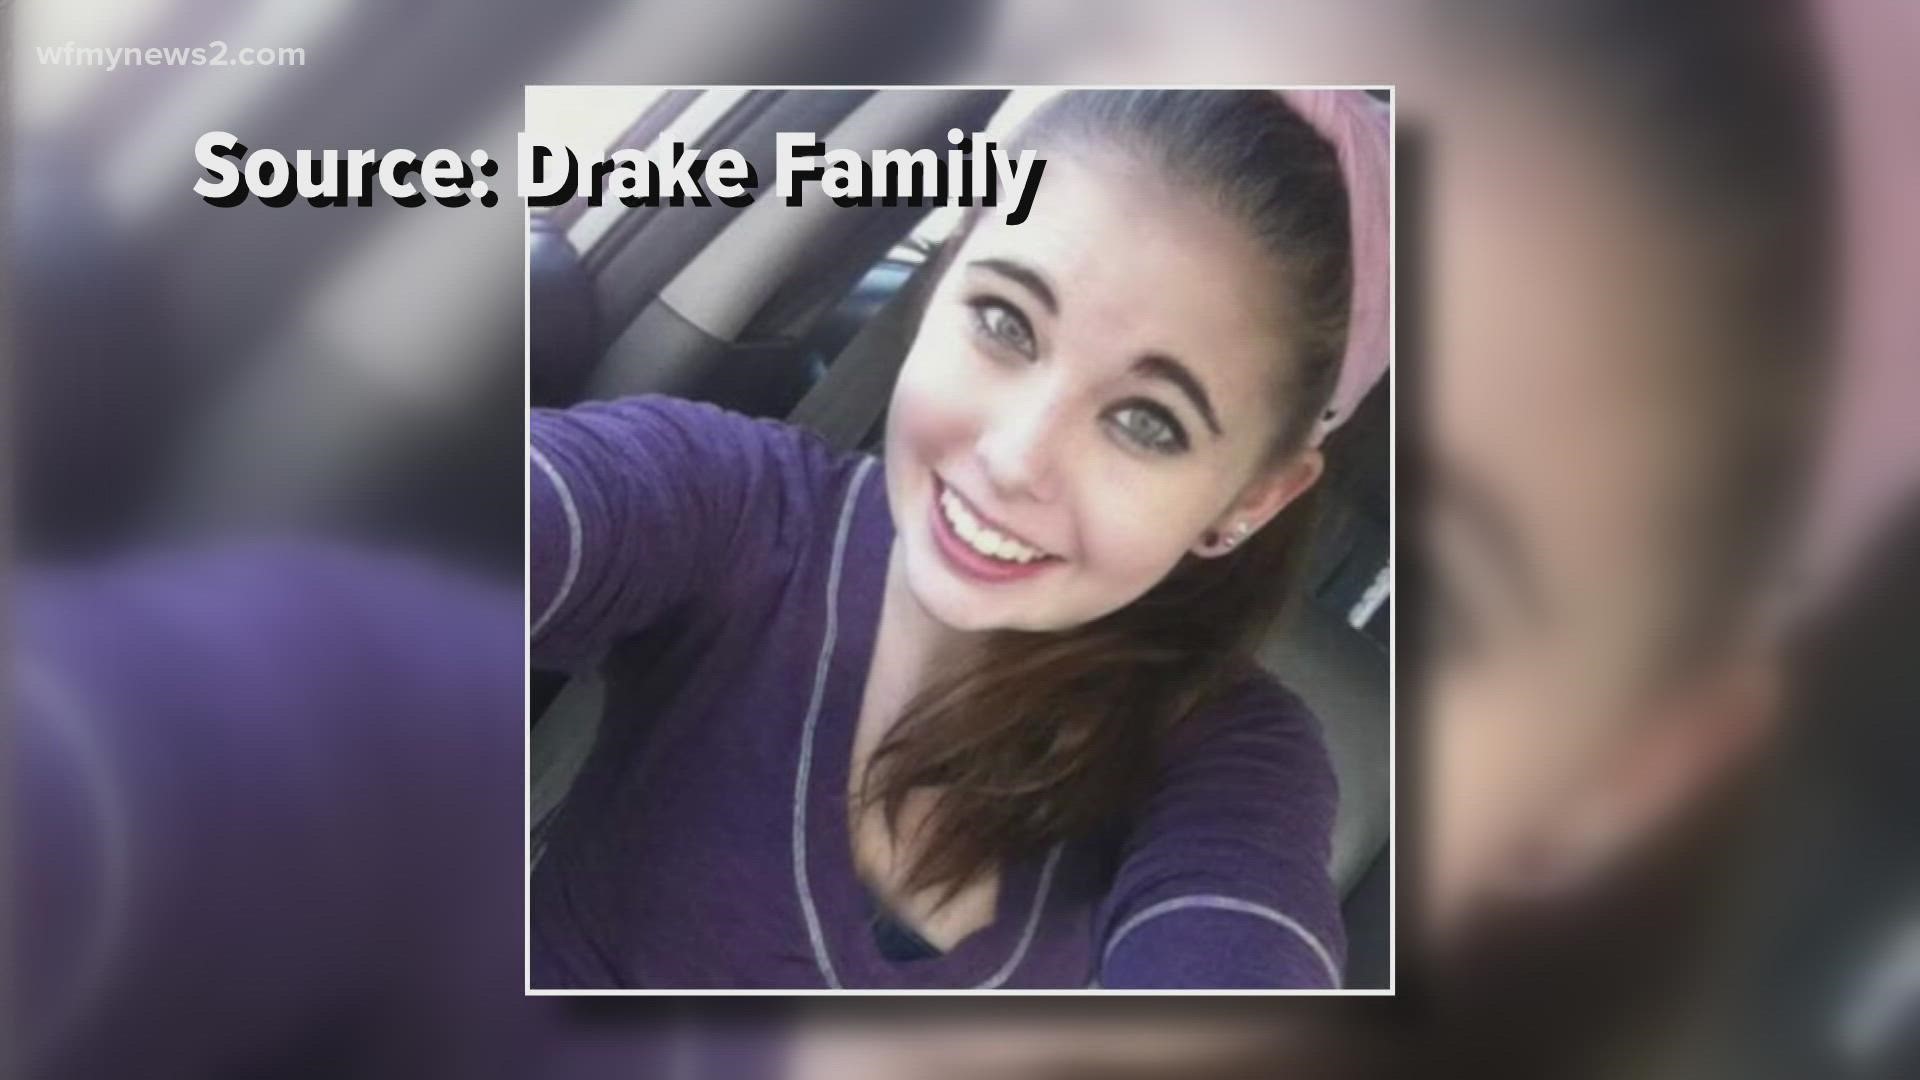 Kaitlyn Drake died July 2020 after overdosing on heroin. Now, her family partners with GC STOP, an organization Kaitlyn volunteered with when she was in recovery.